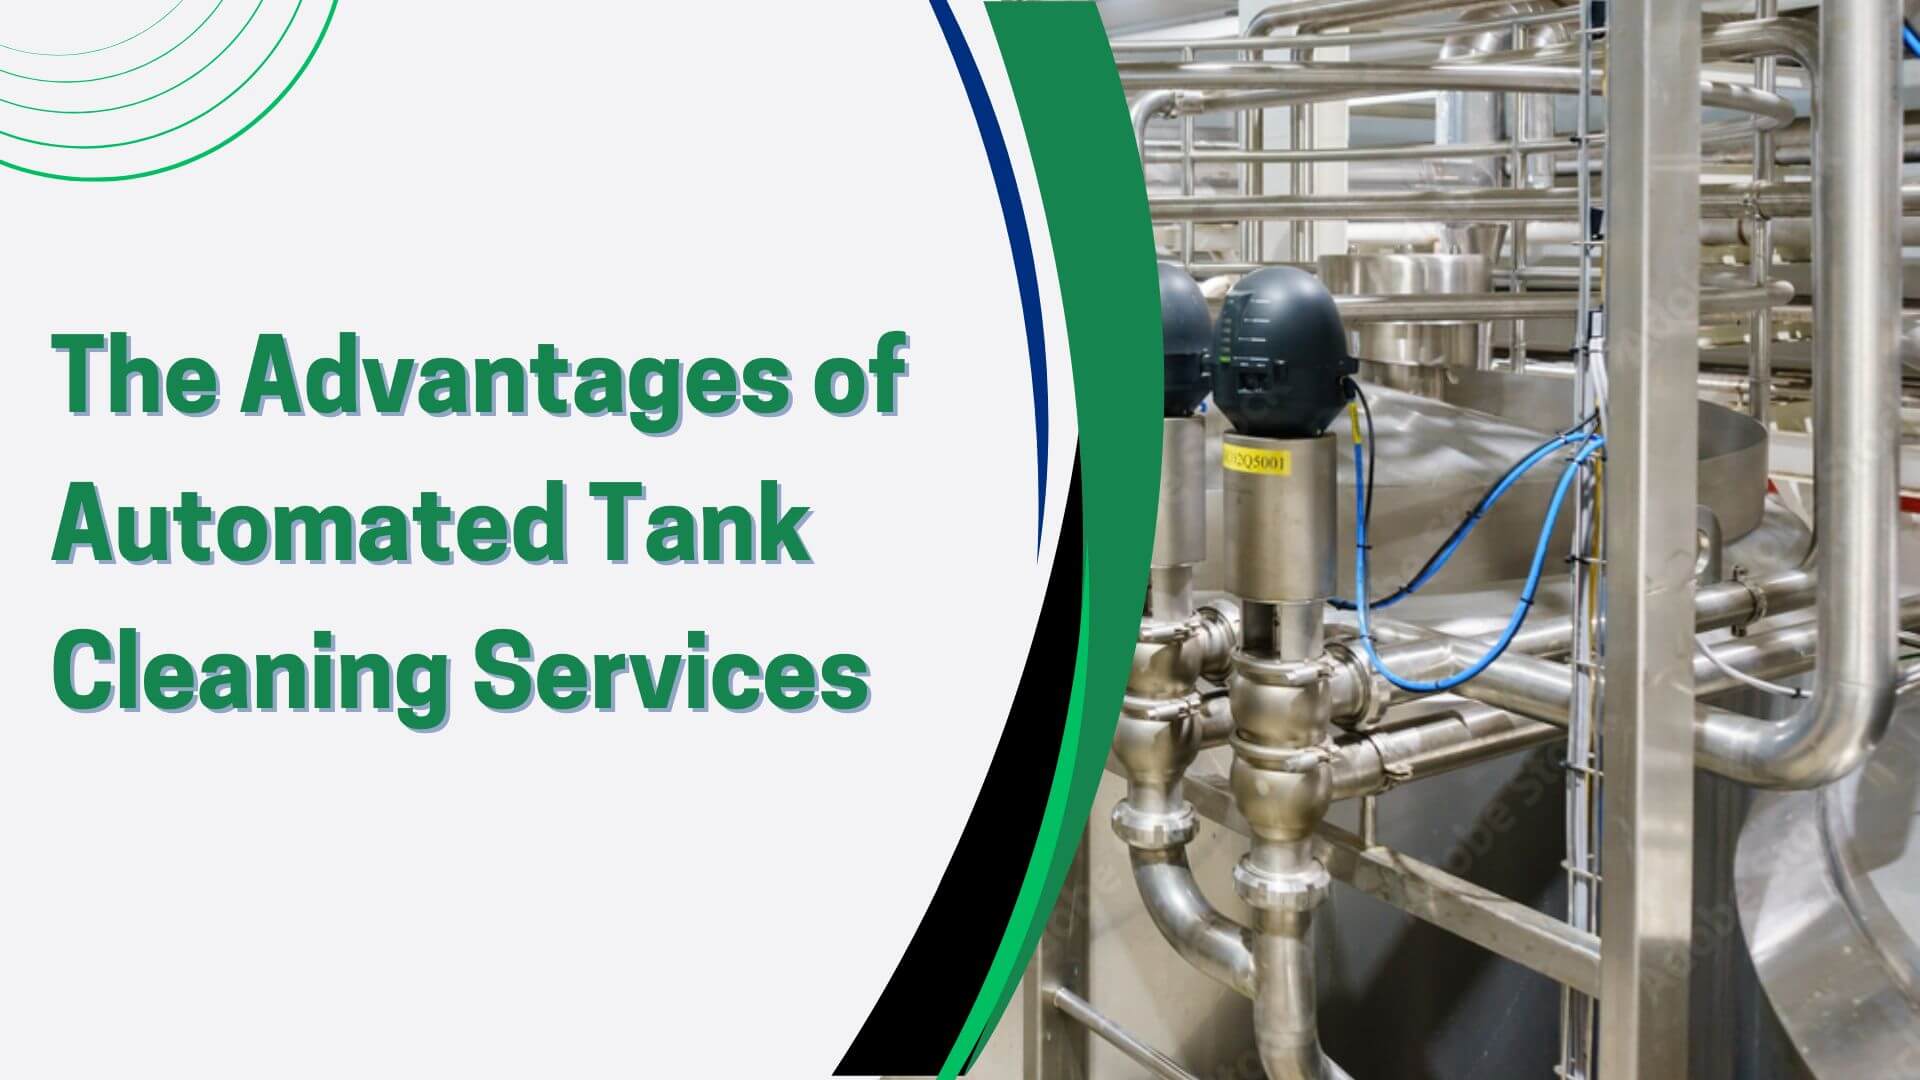 The Advantages of Automated Tank Cleaning Services